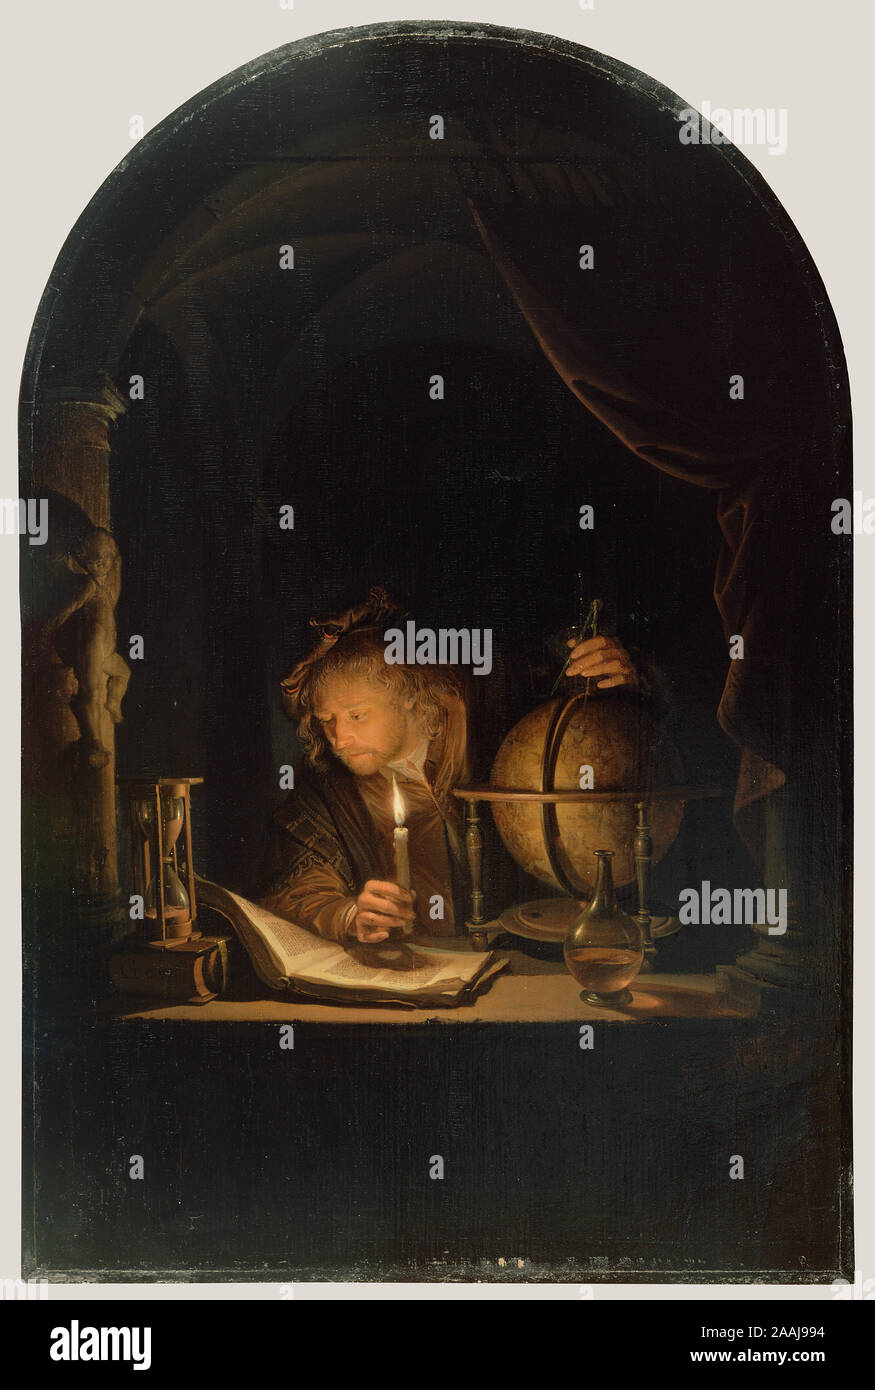 Astronomer by Candlelight; Gerrit Dou (Dutch, 1613 - 1675); Netherlands; late 1650s; Oil on panel; 32 × 21.2 cm (12 5/8 × 8 3/8 in.); 86.PB.732 Stock Photo